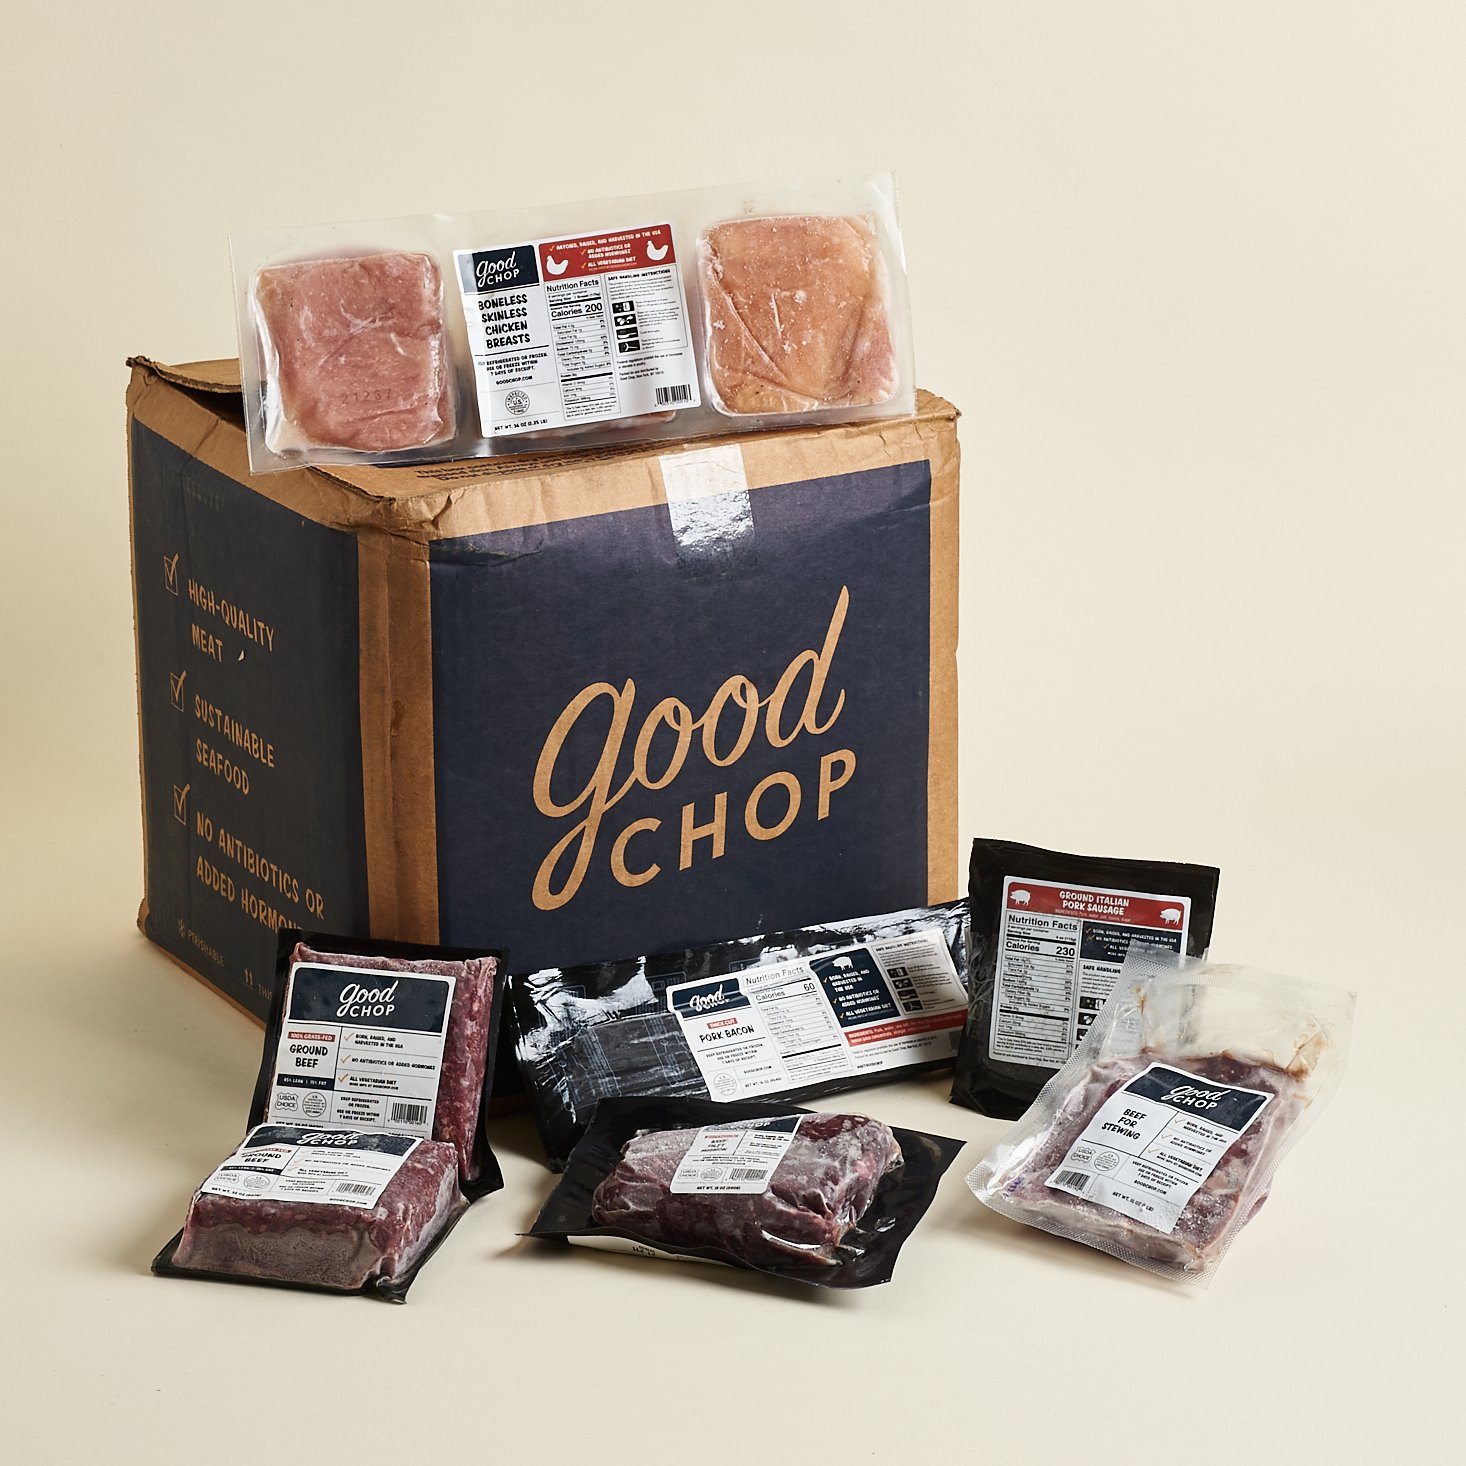 Good Chop has a Black Friday 2021 Deal available now – $100 off your first three boxes